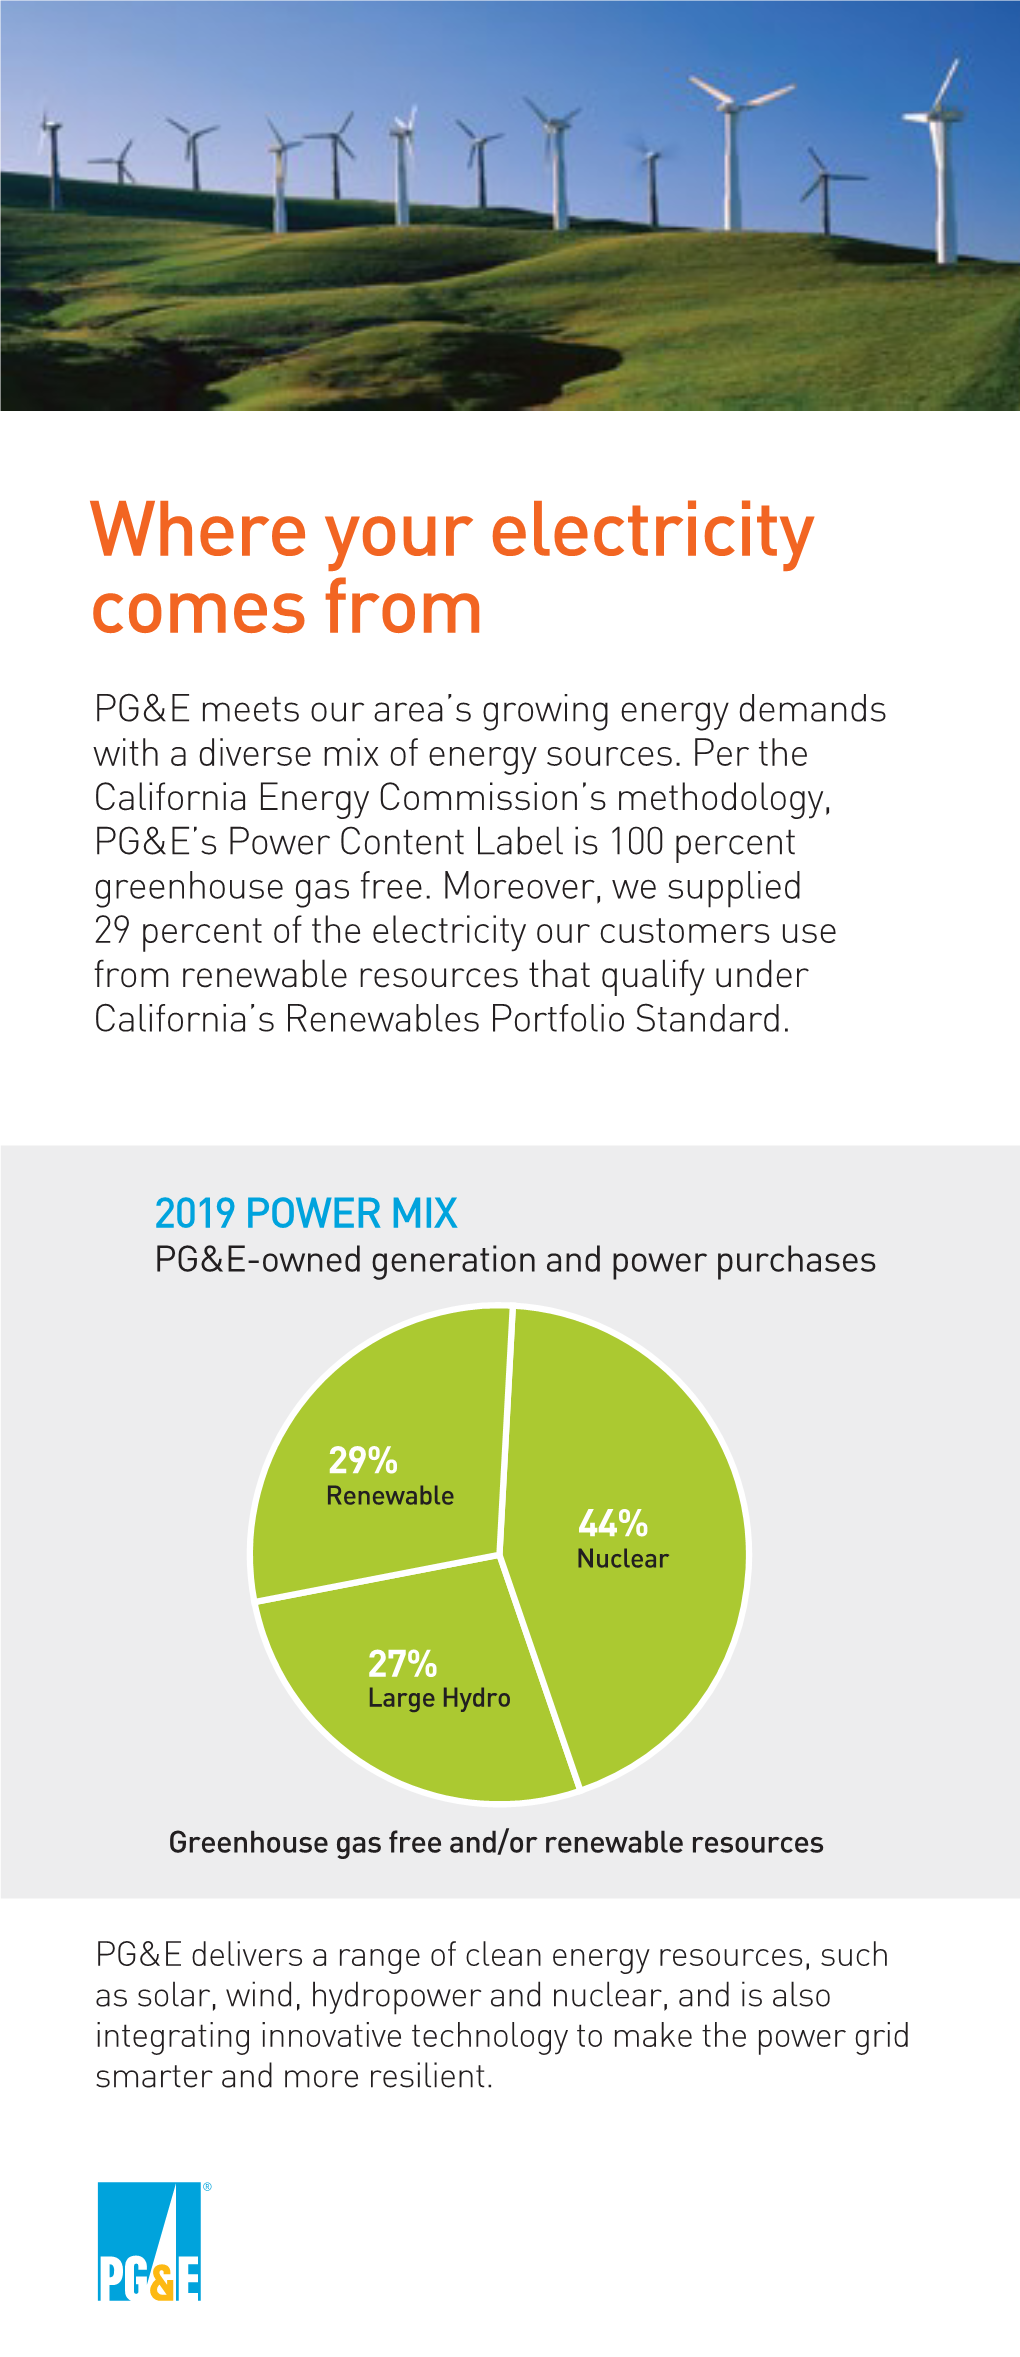 PG&E's Power Mix: Where Your Electricity Comes From